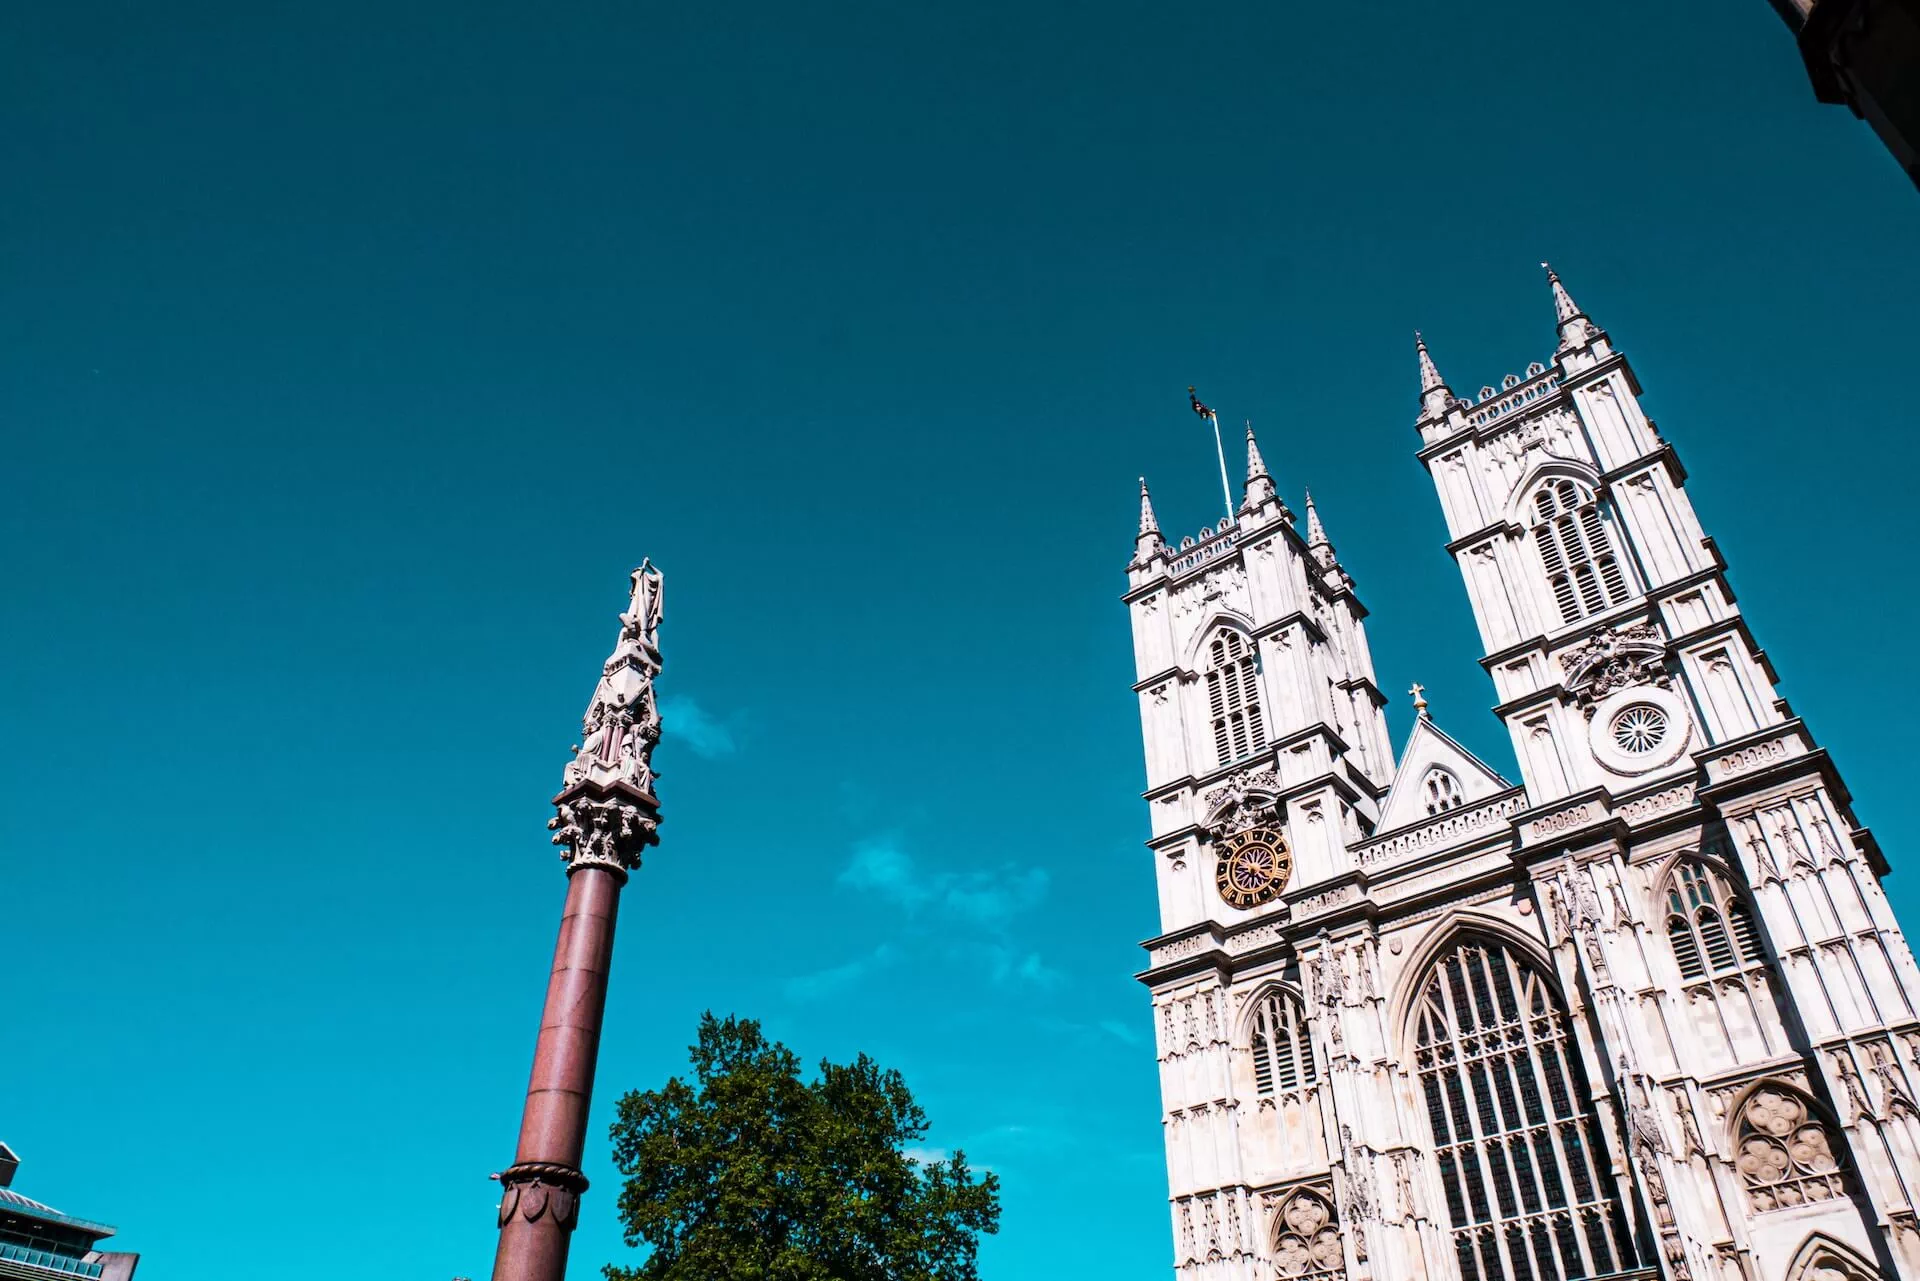   The facade of London’s Westminster Abbey glows in sunshine